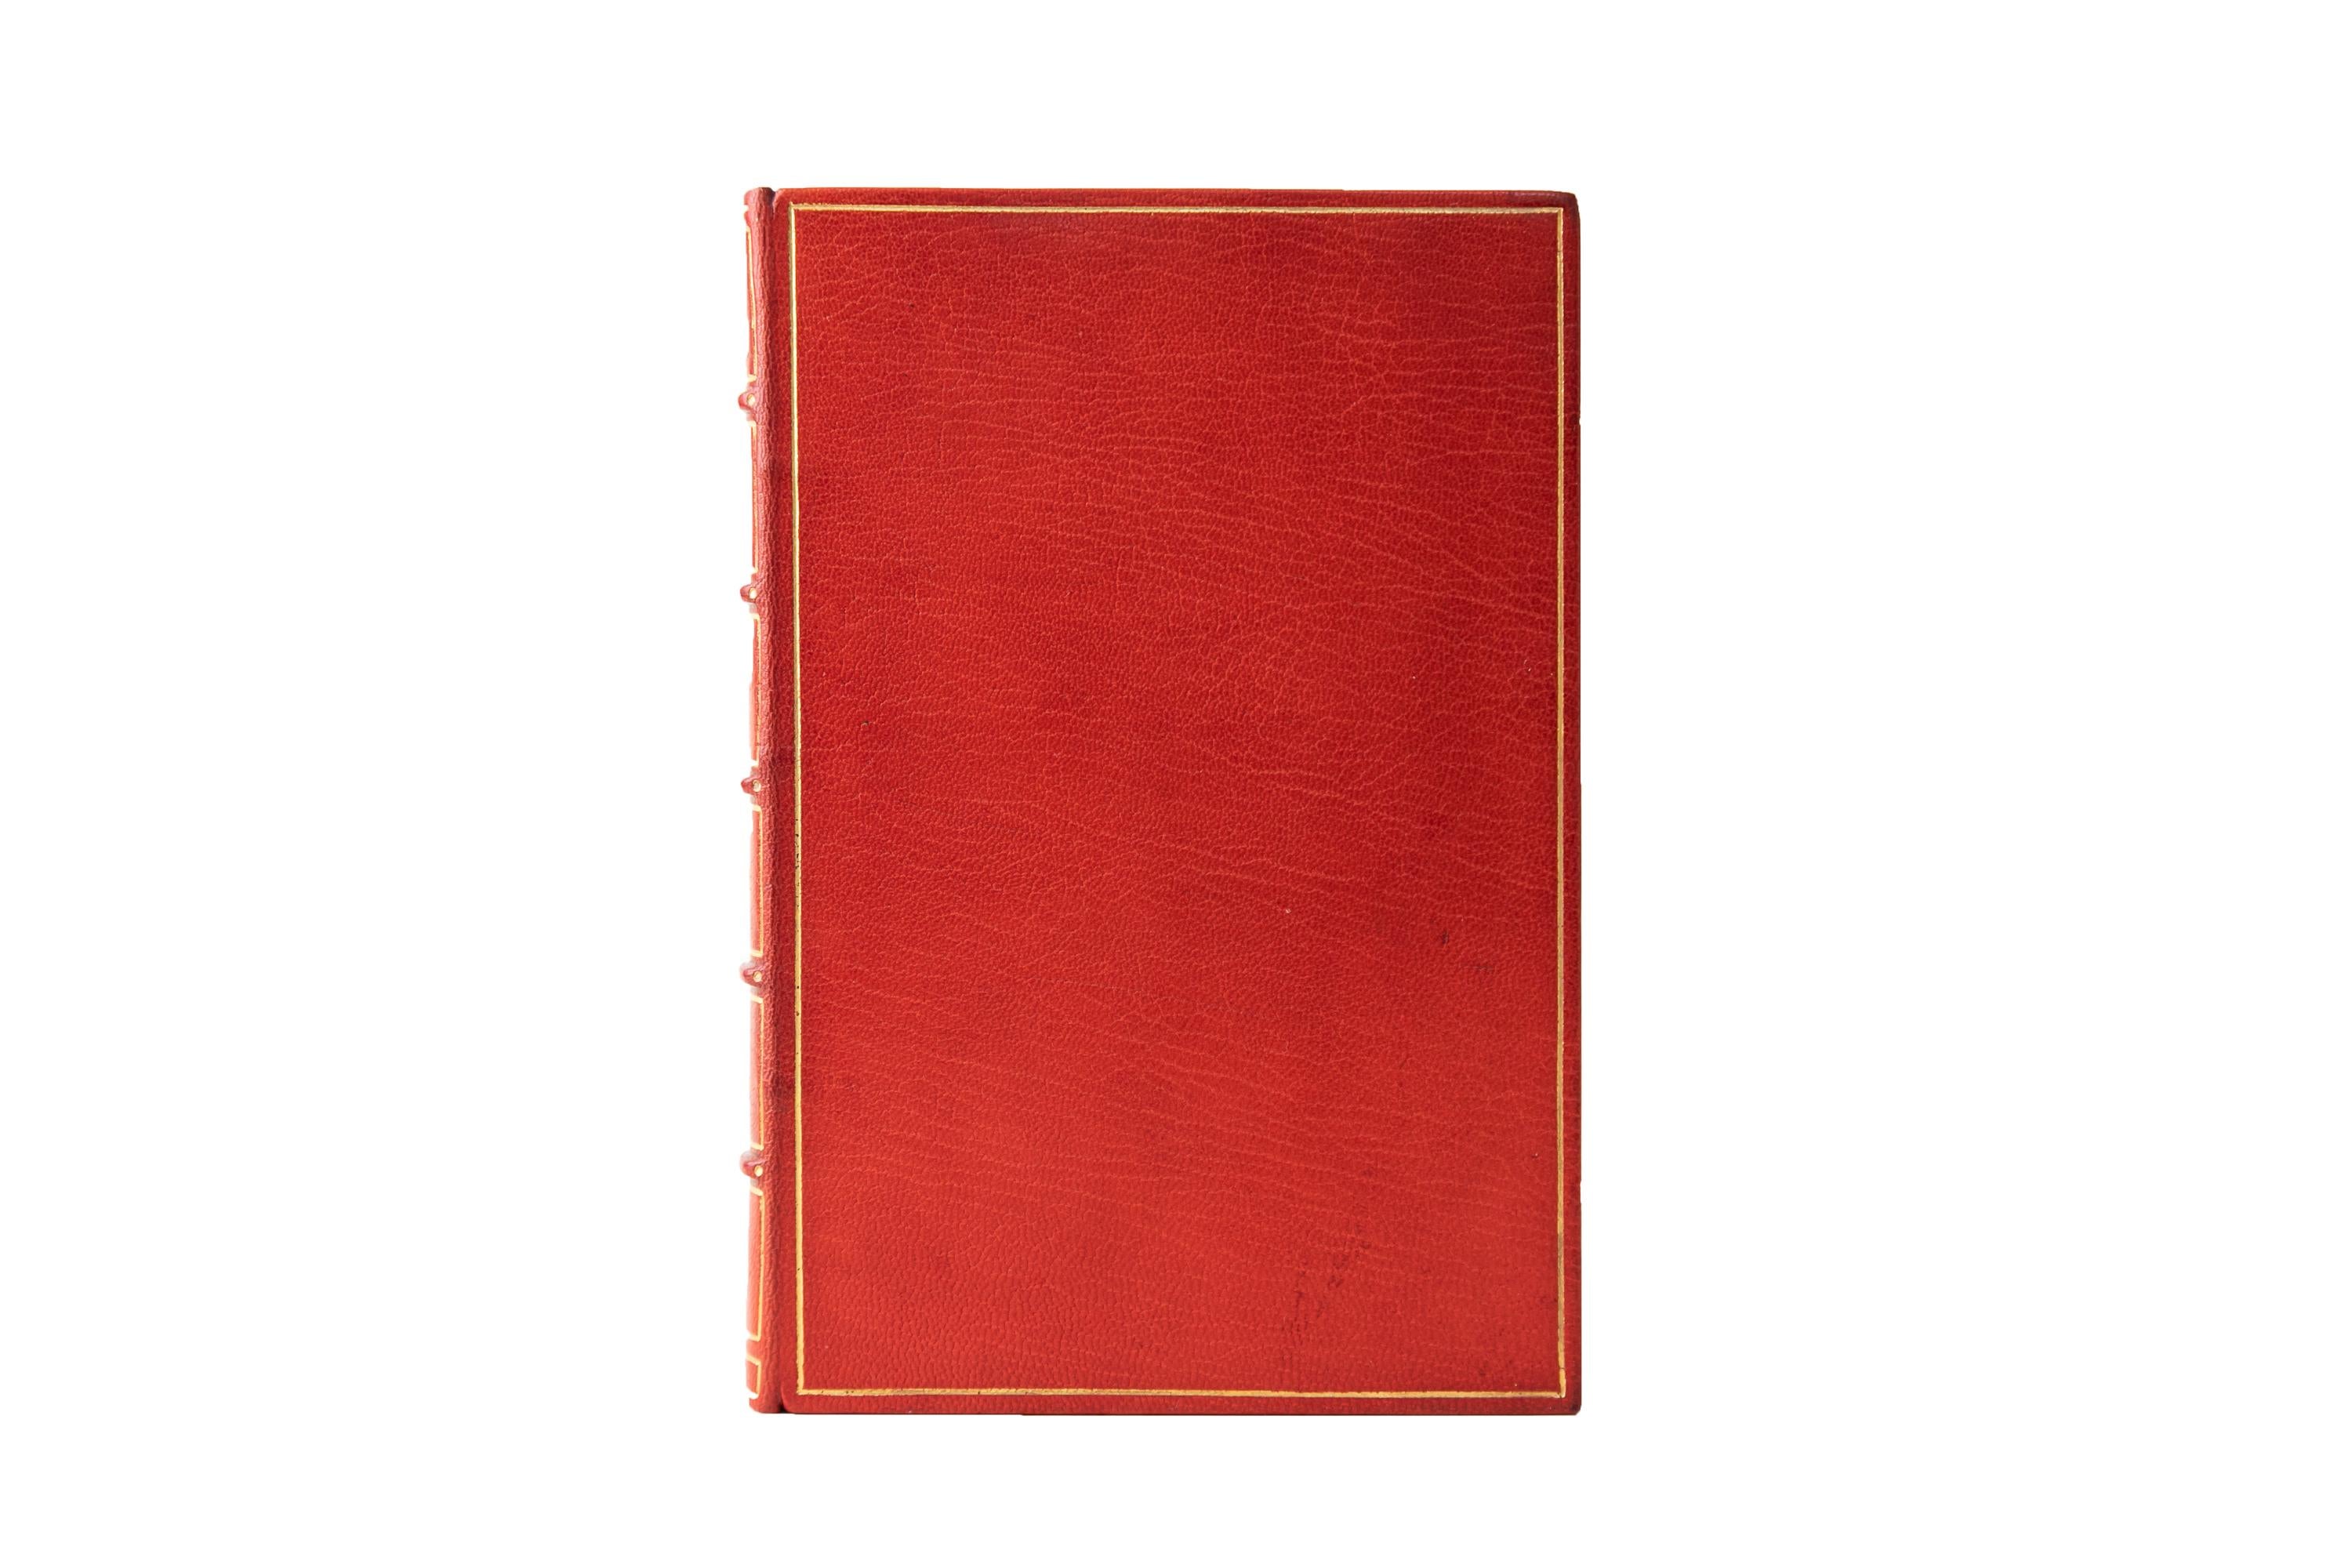 1 Volume. Robert Frost, The Complete Poems. Bound by Bayntun in full red morocco with the covers displaying a gilt-tooled border. The spines display raised bands, bordering, and label lettering, all gilt-tooled. All of the edges are gilded with